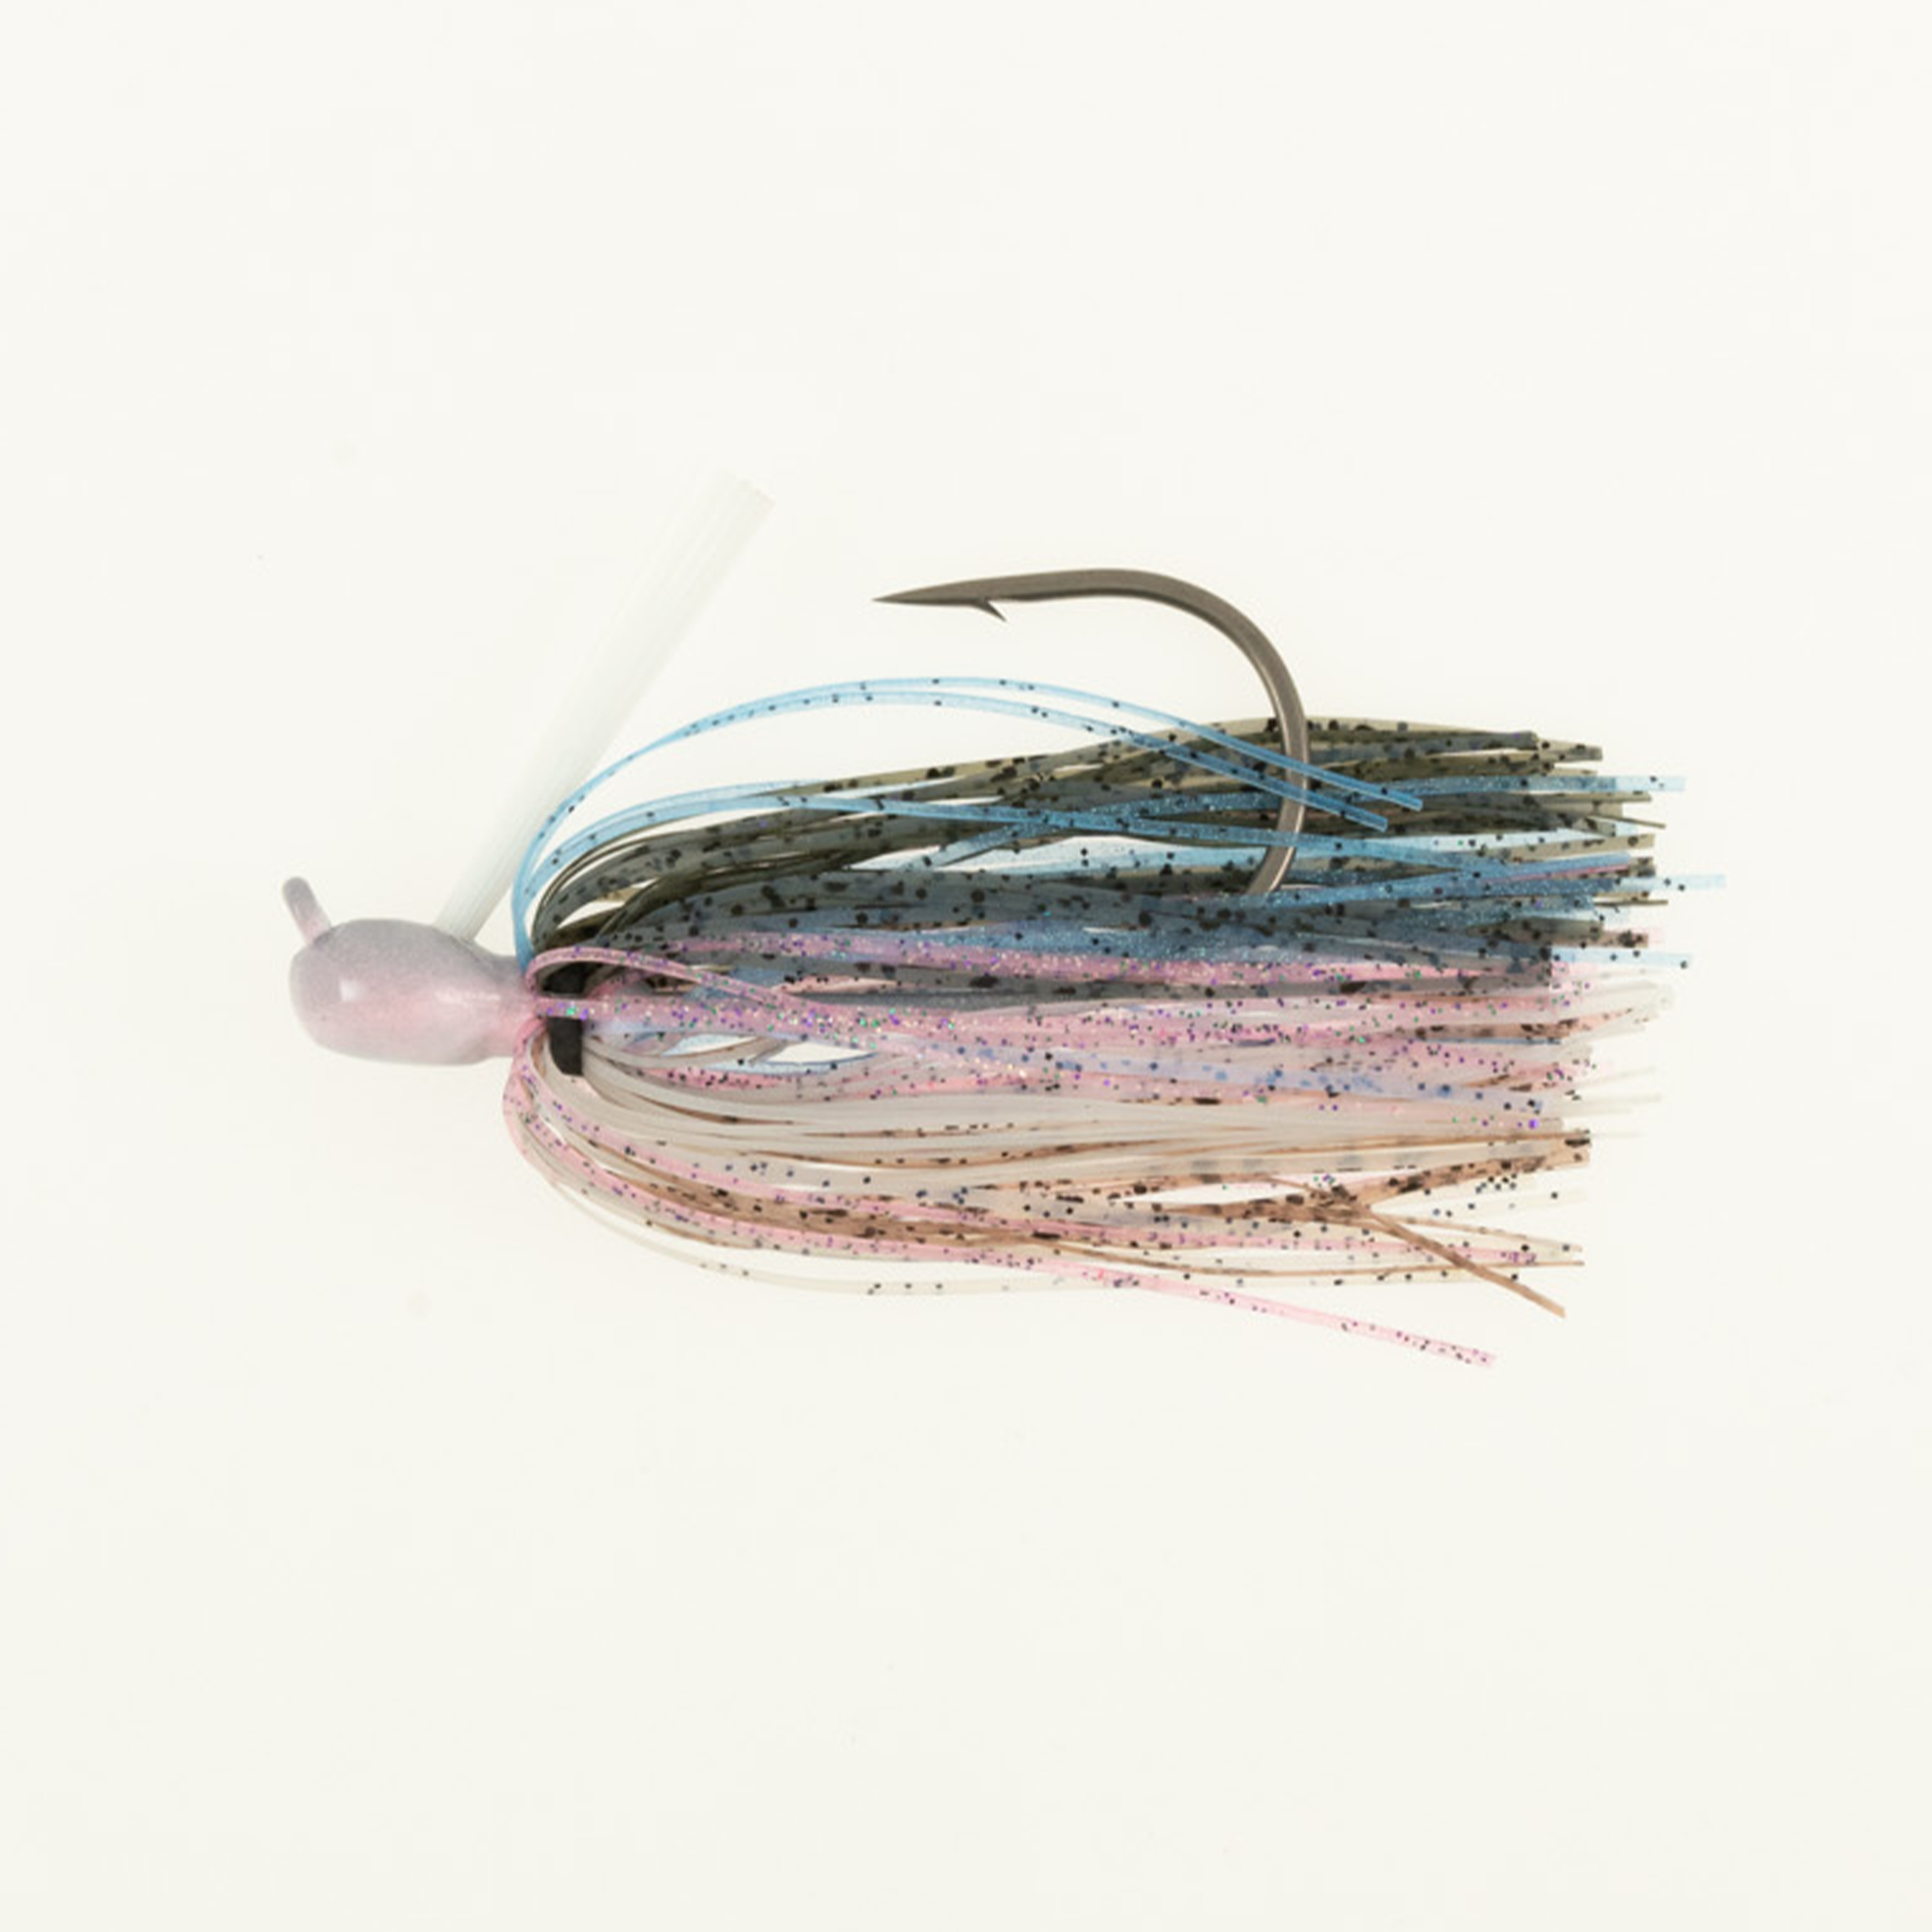 Missile Baits Introduces New Monster Jig - Wired2Fish